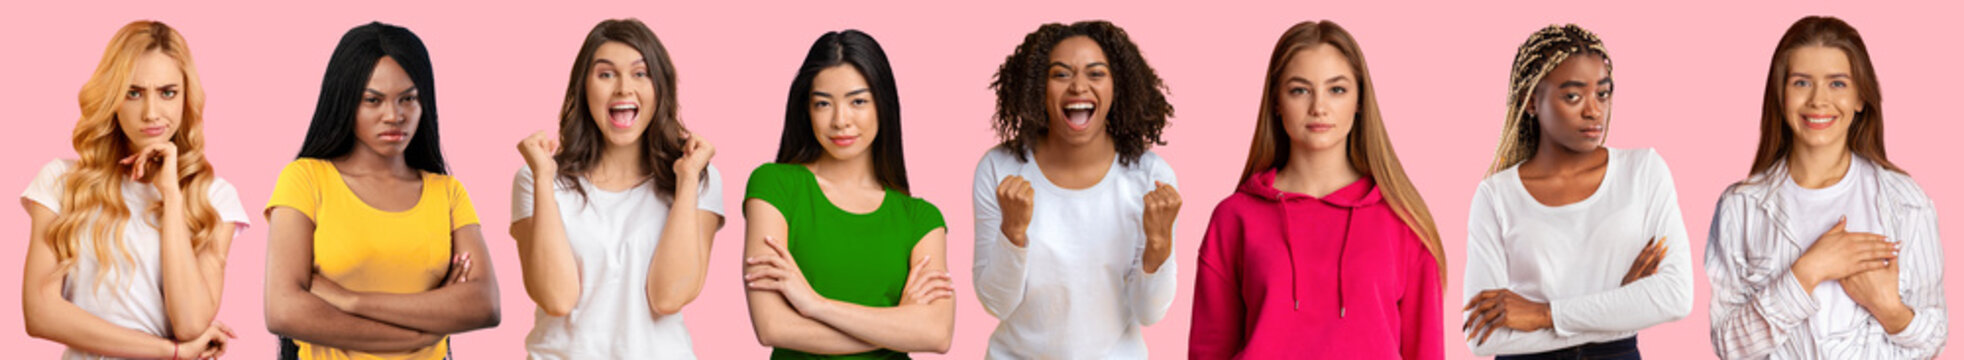 Group of pretty multiracial millennial females express different facial emotions